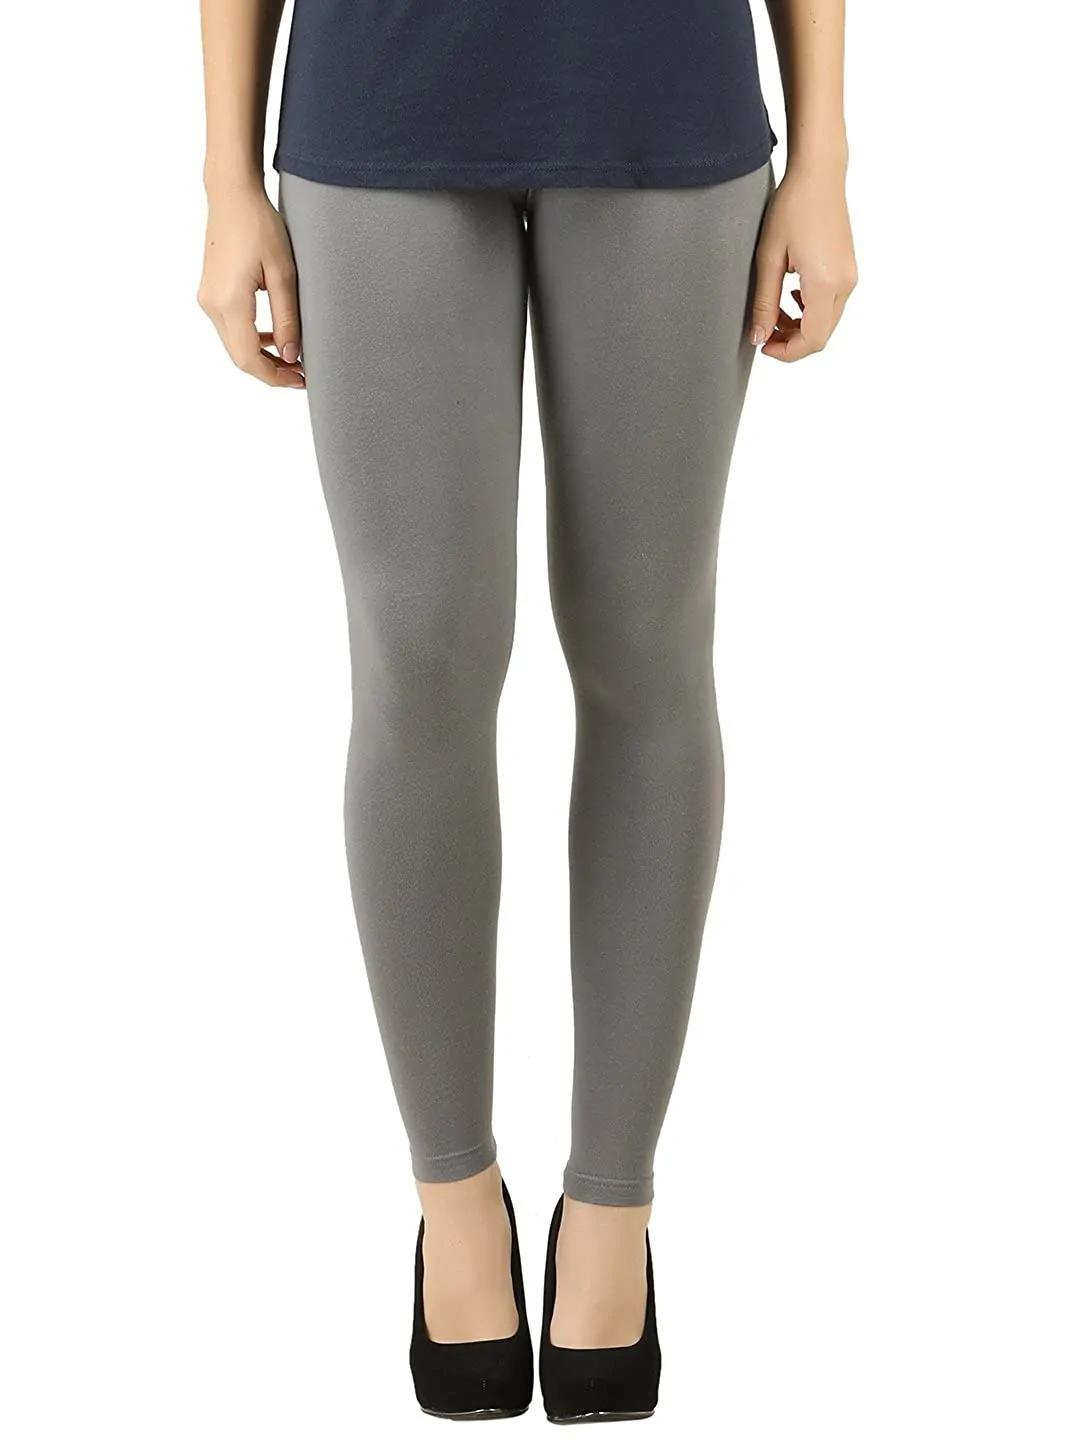 A Guide On Finding Your Perfect Legging Length | Alo Yoga